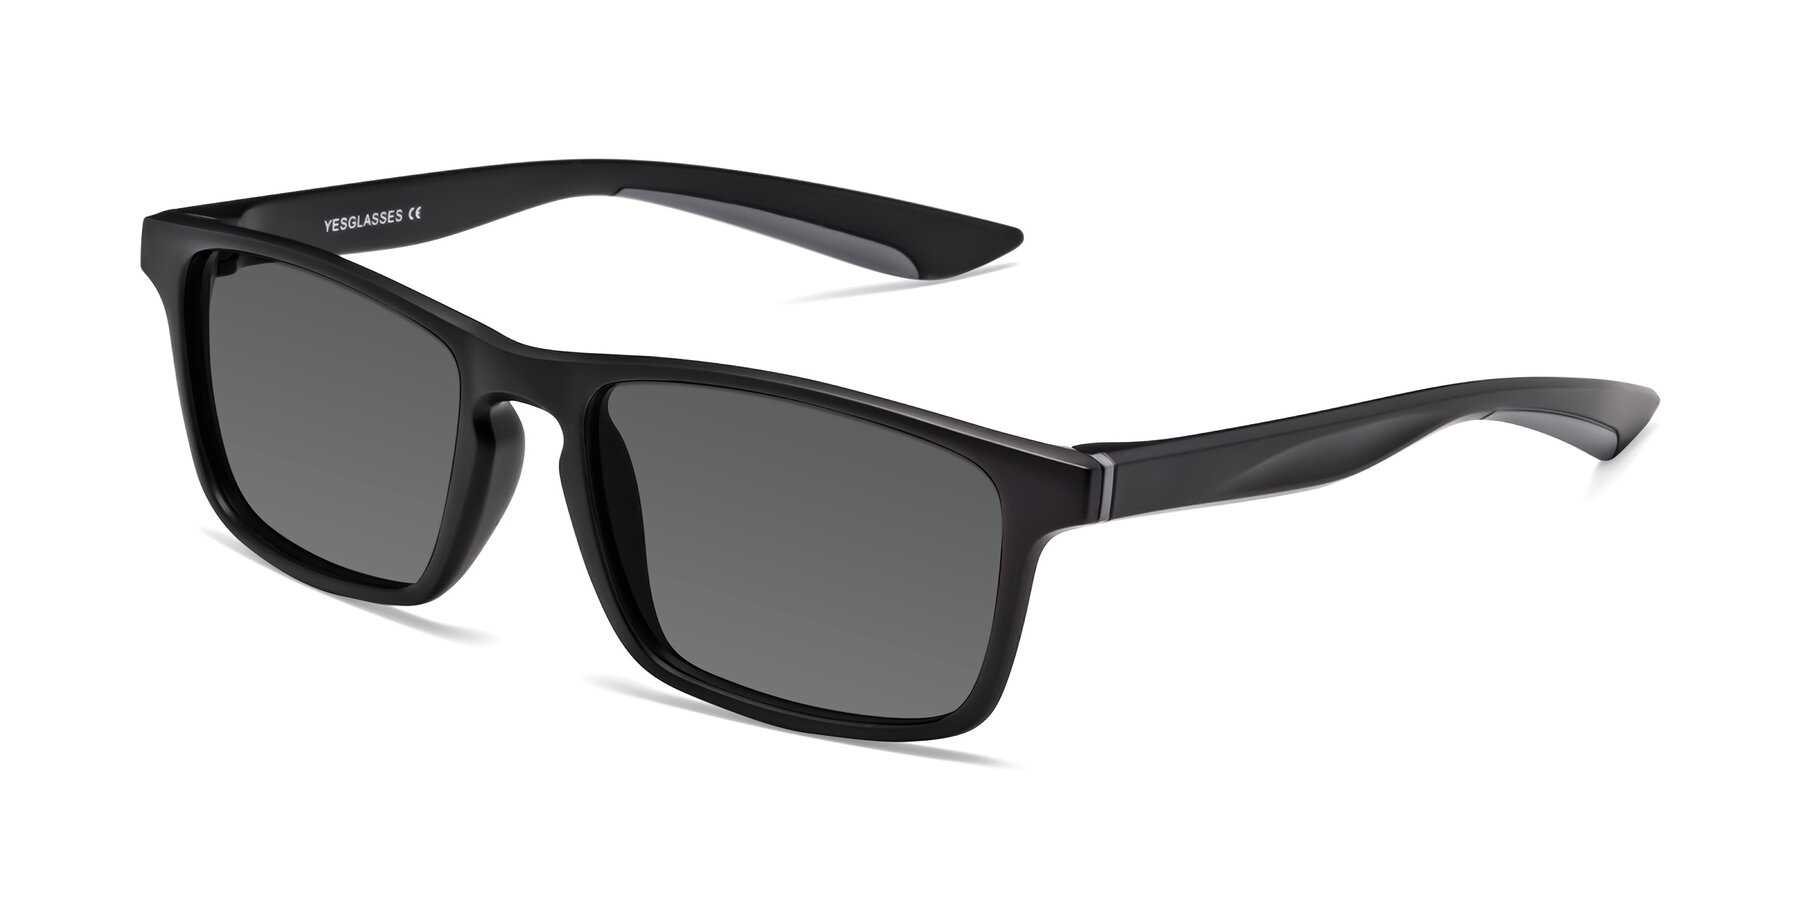 Angle of Passion in Matte Black-Gray with Medium Gray Tinted Lenses